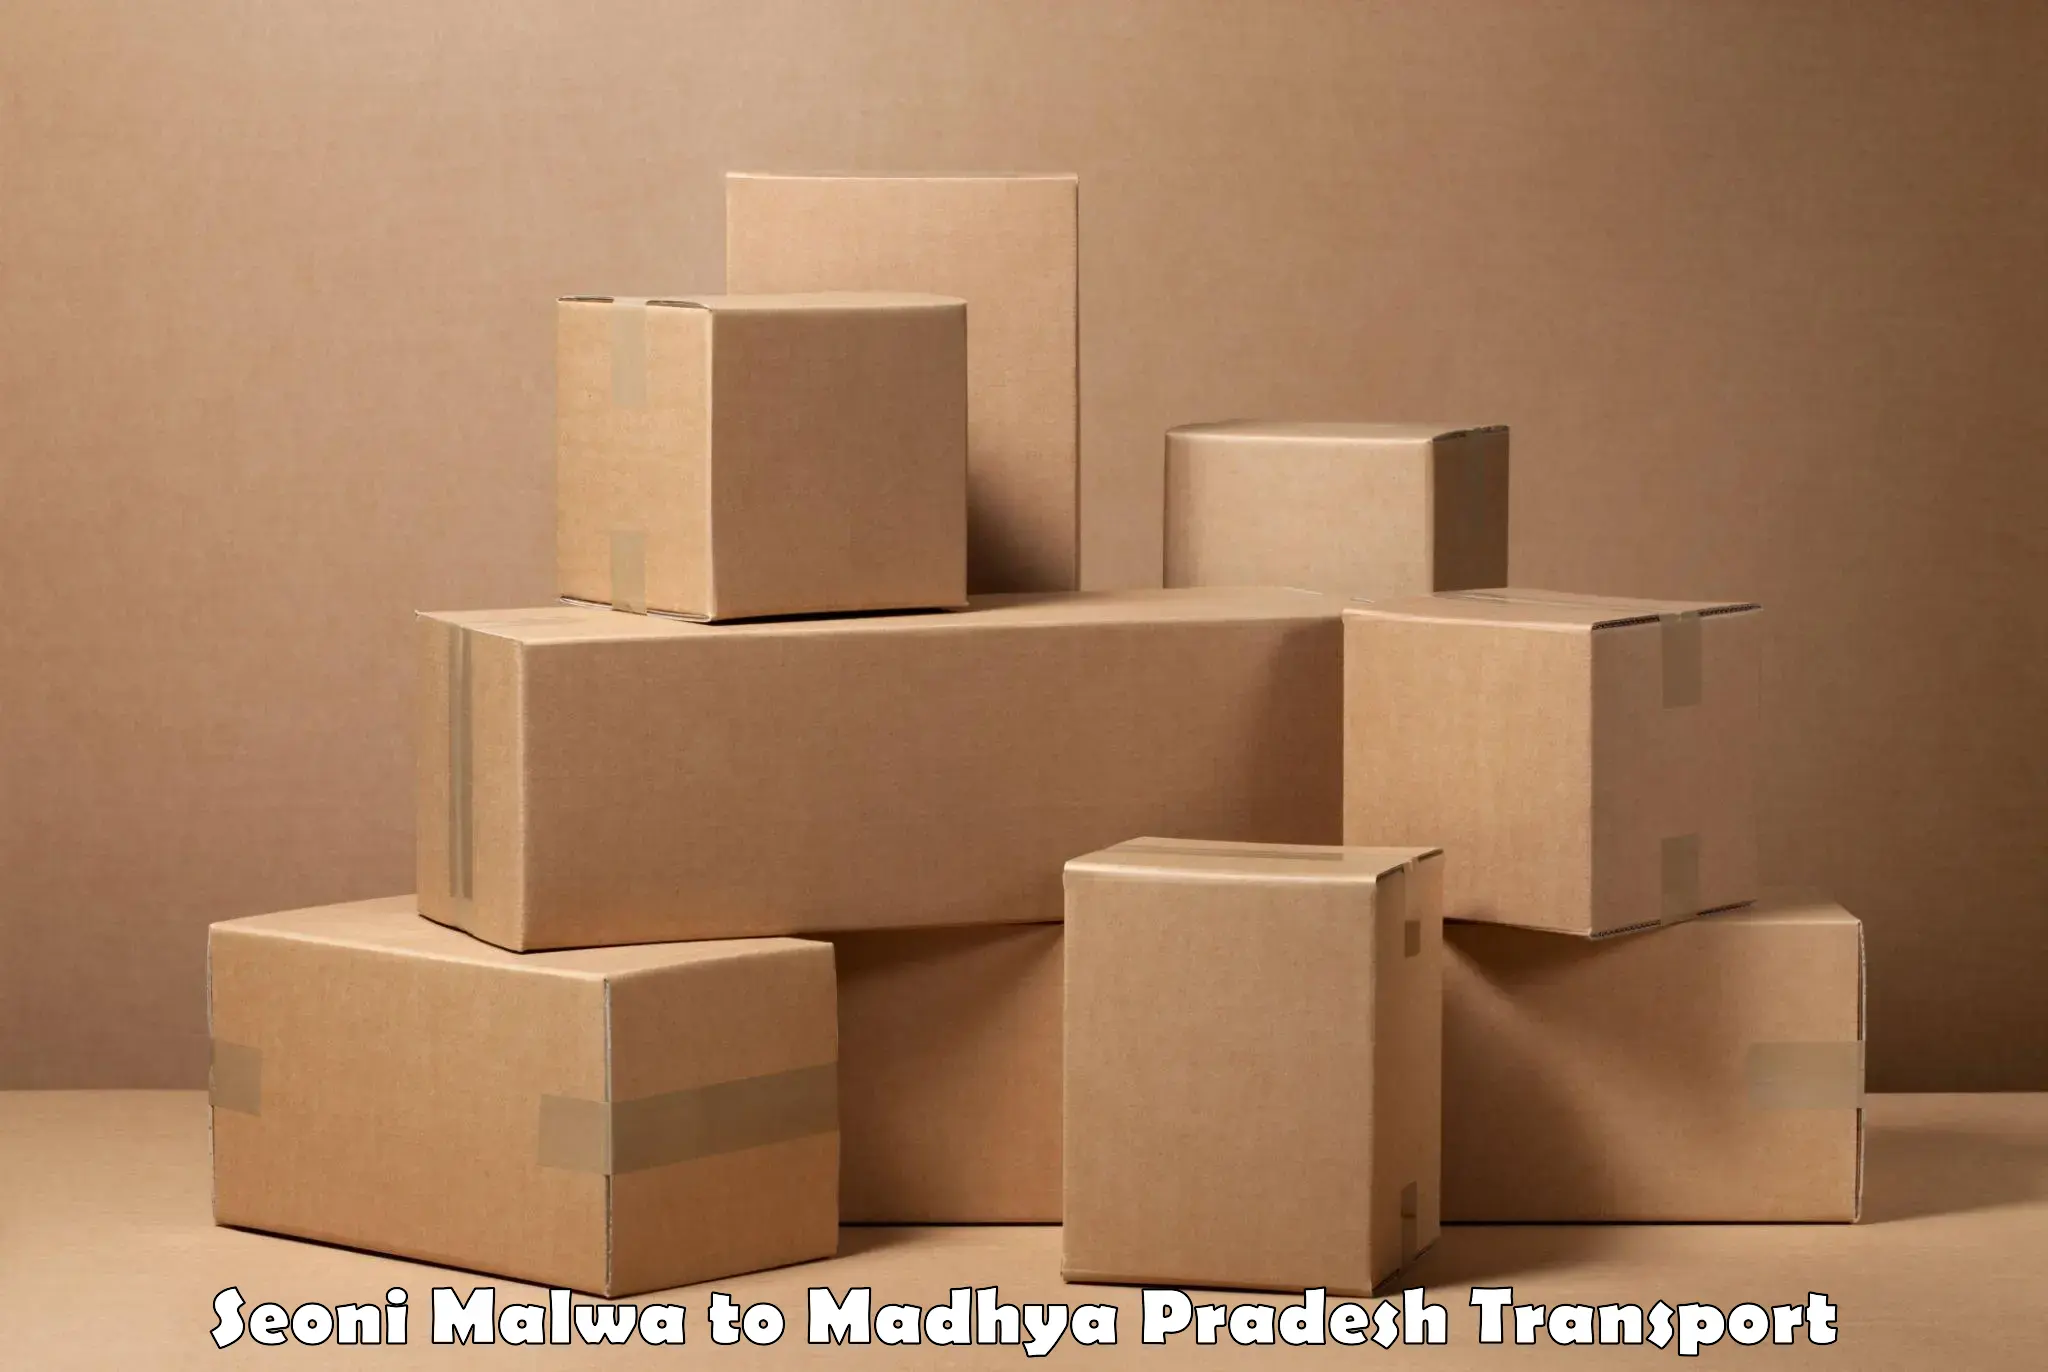 Container transportation services Seoni Malwa to Burhanpur